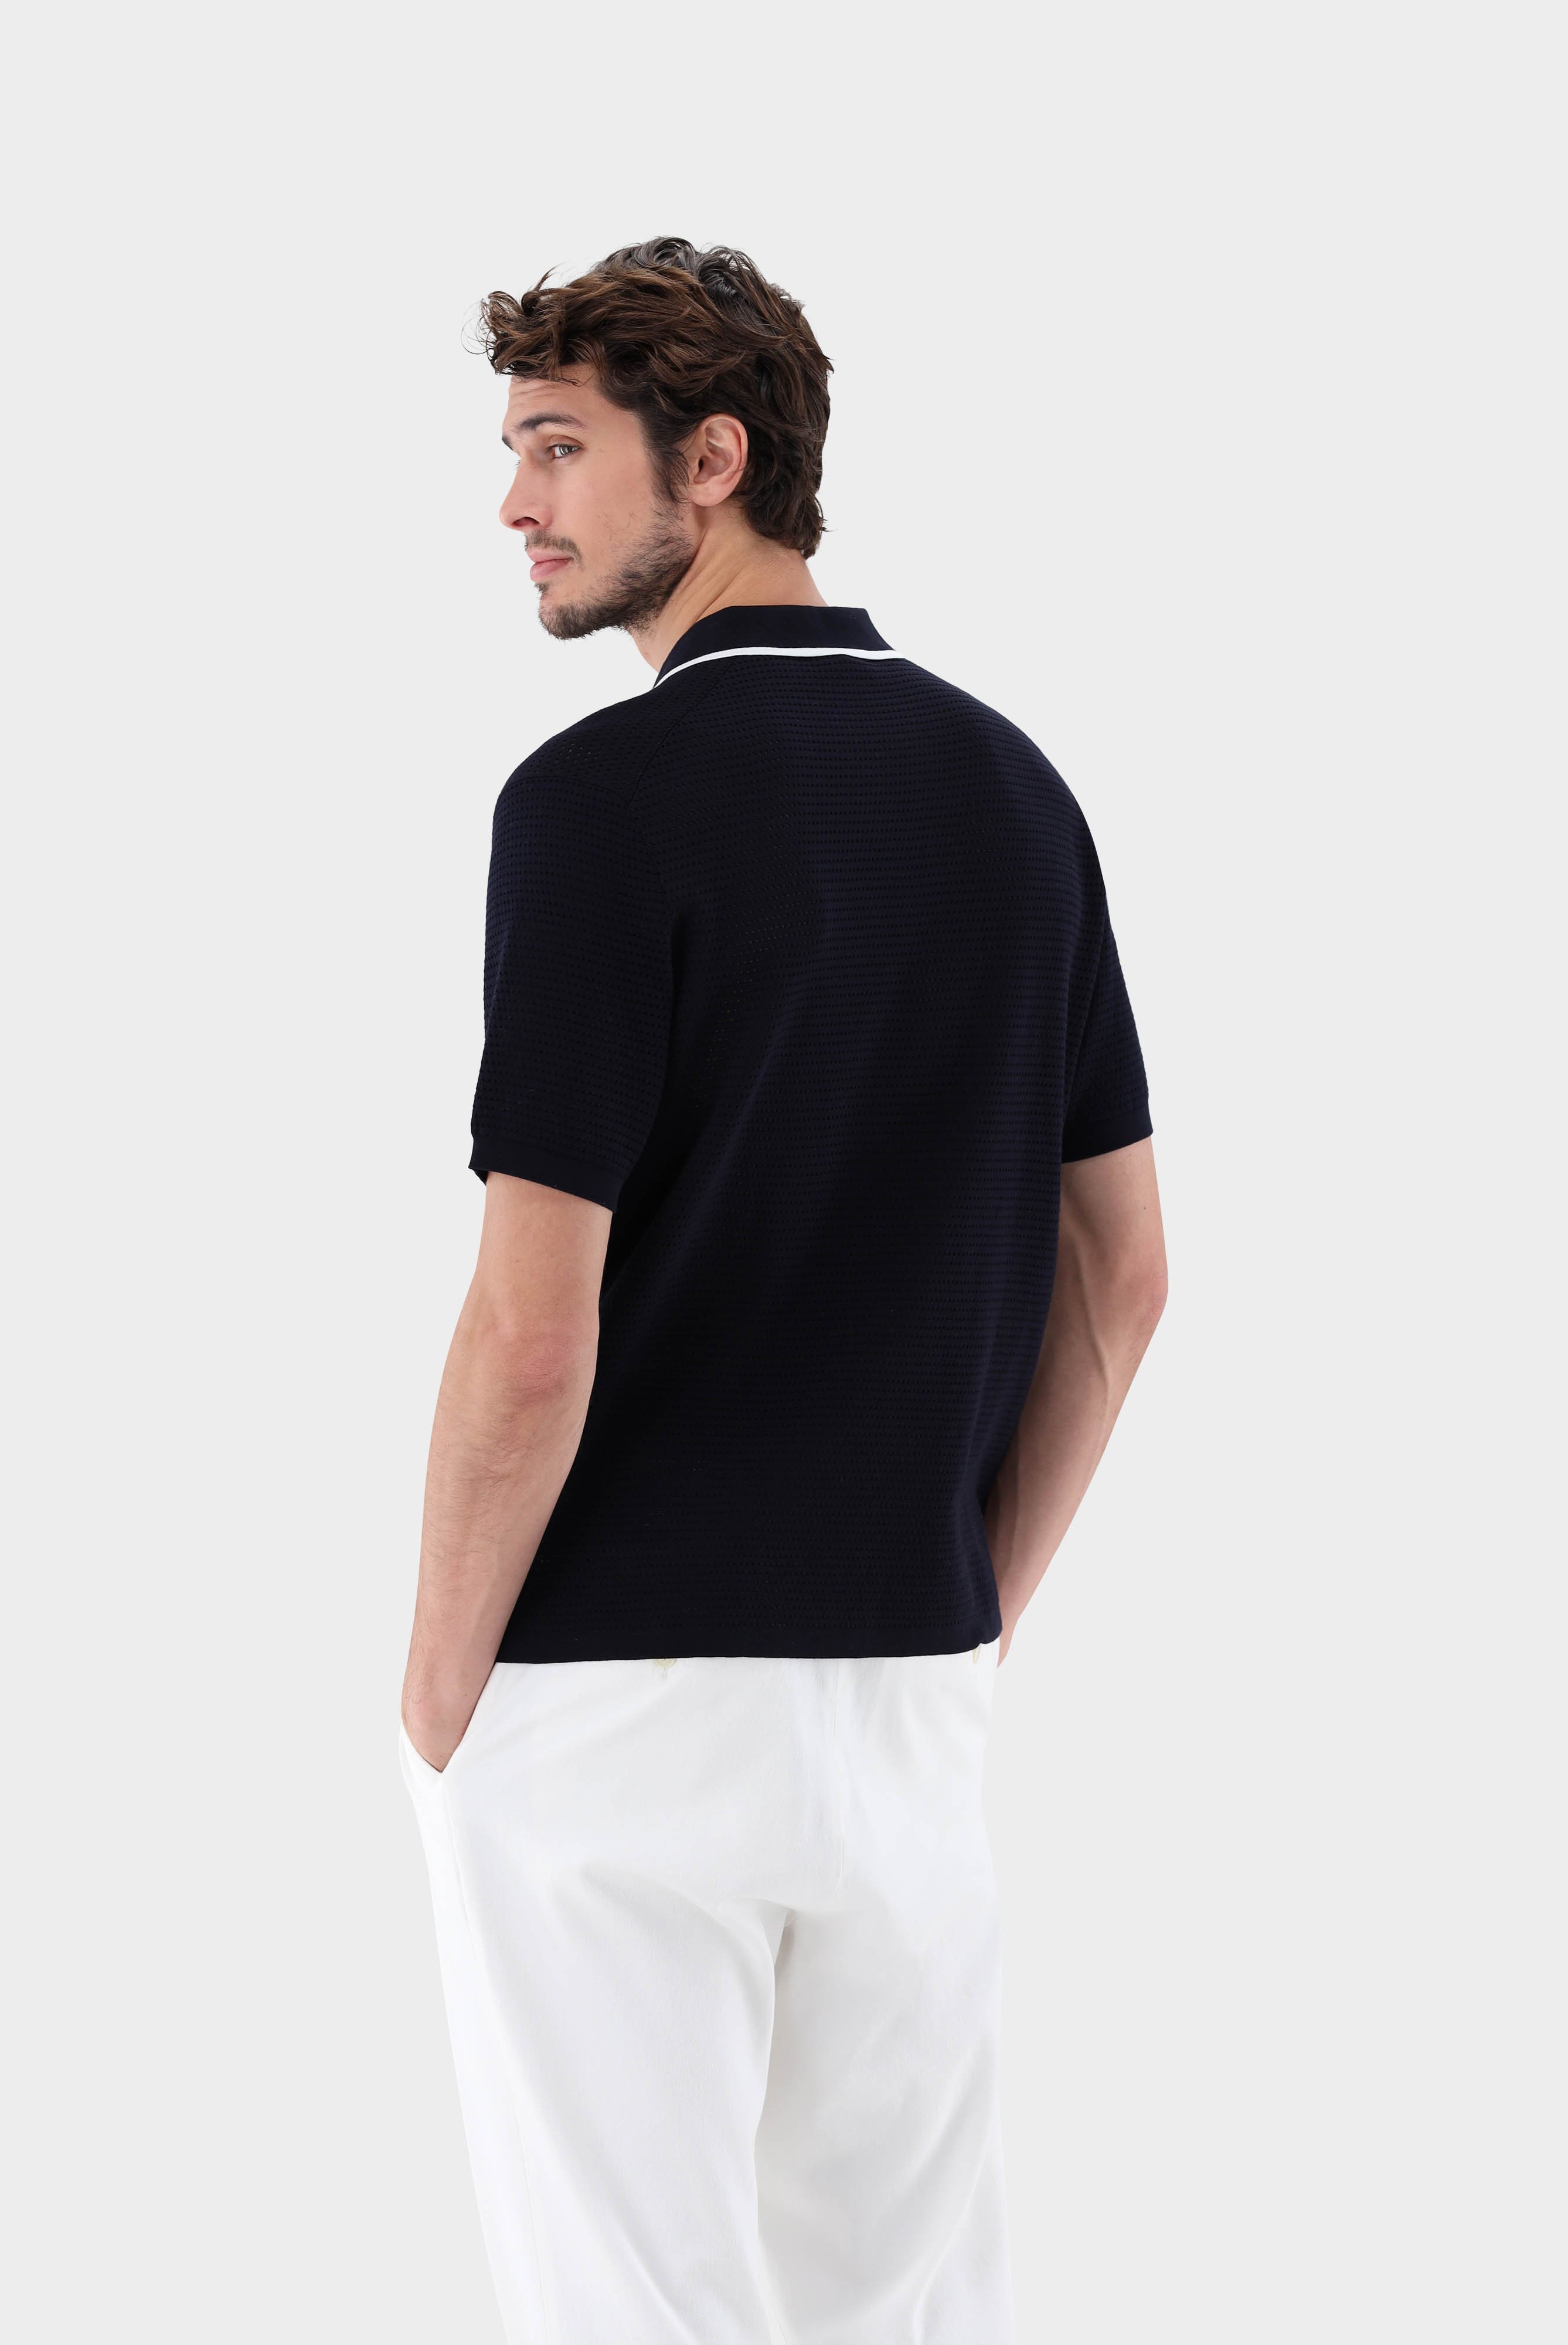 Poloshirts+Knit polo with mesh structure and contrast collar+82.8645.S7.S00267.795.S